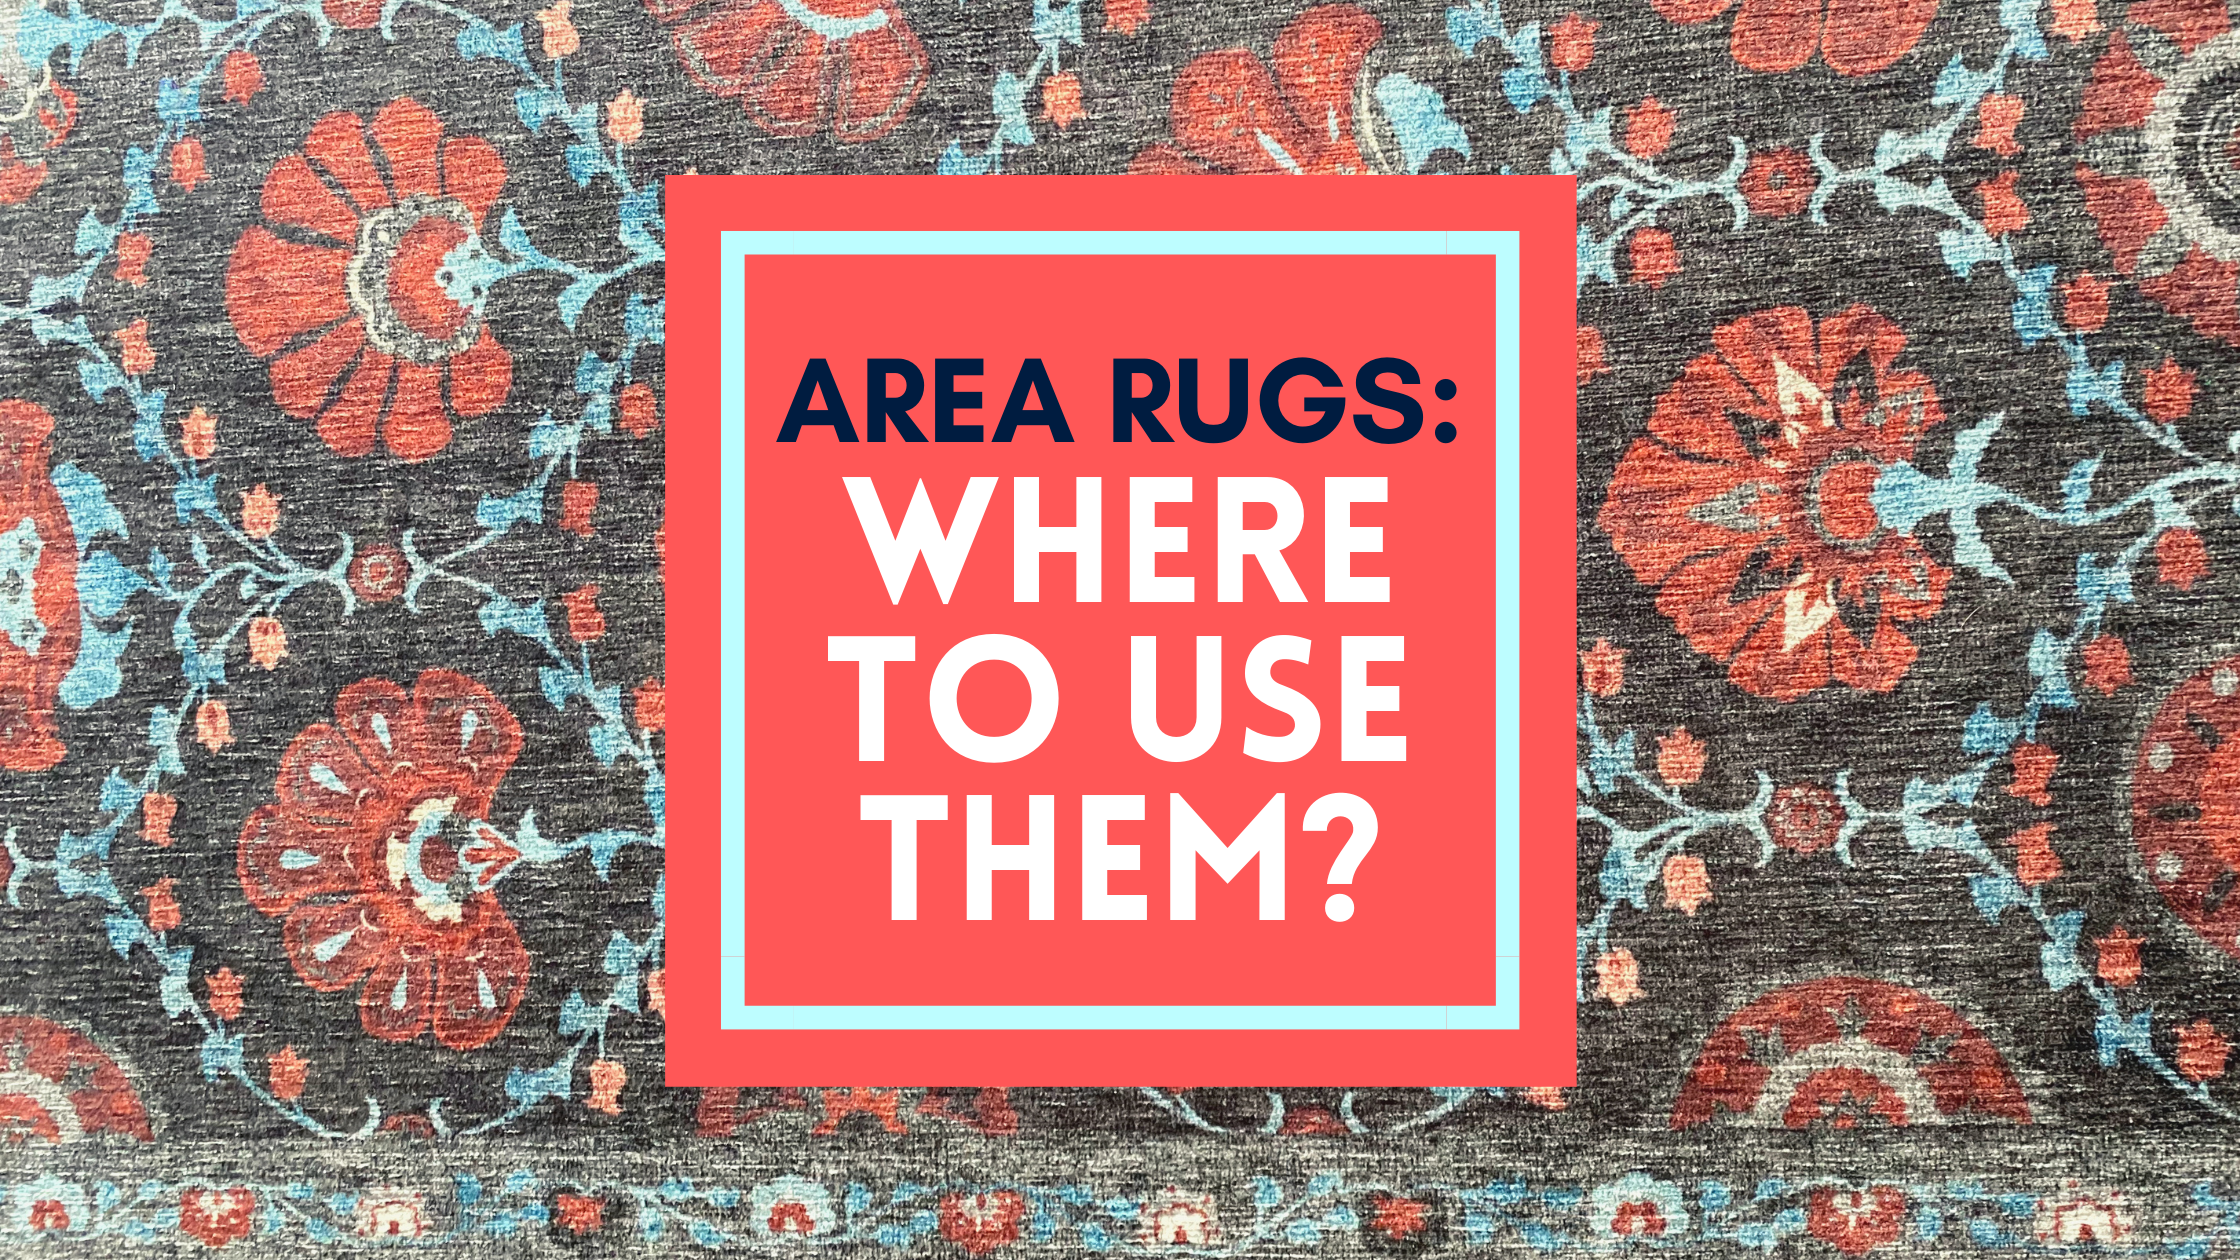 Area Rugs: Where to Use Them?